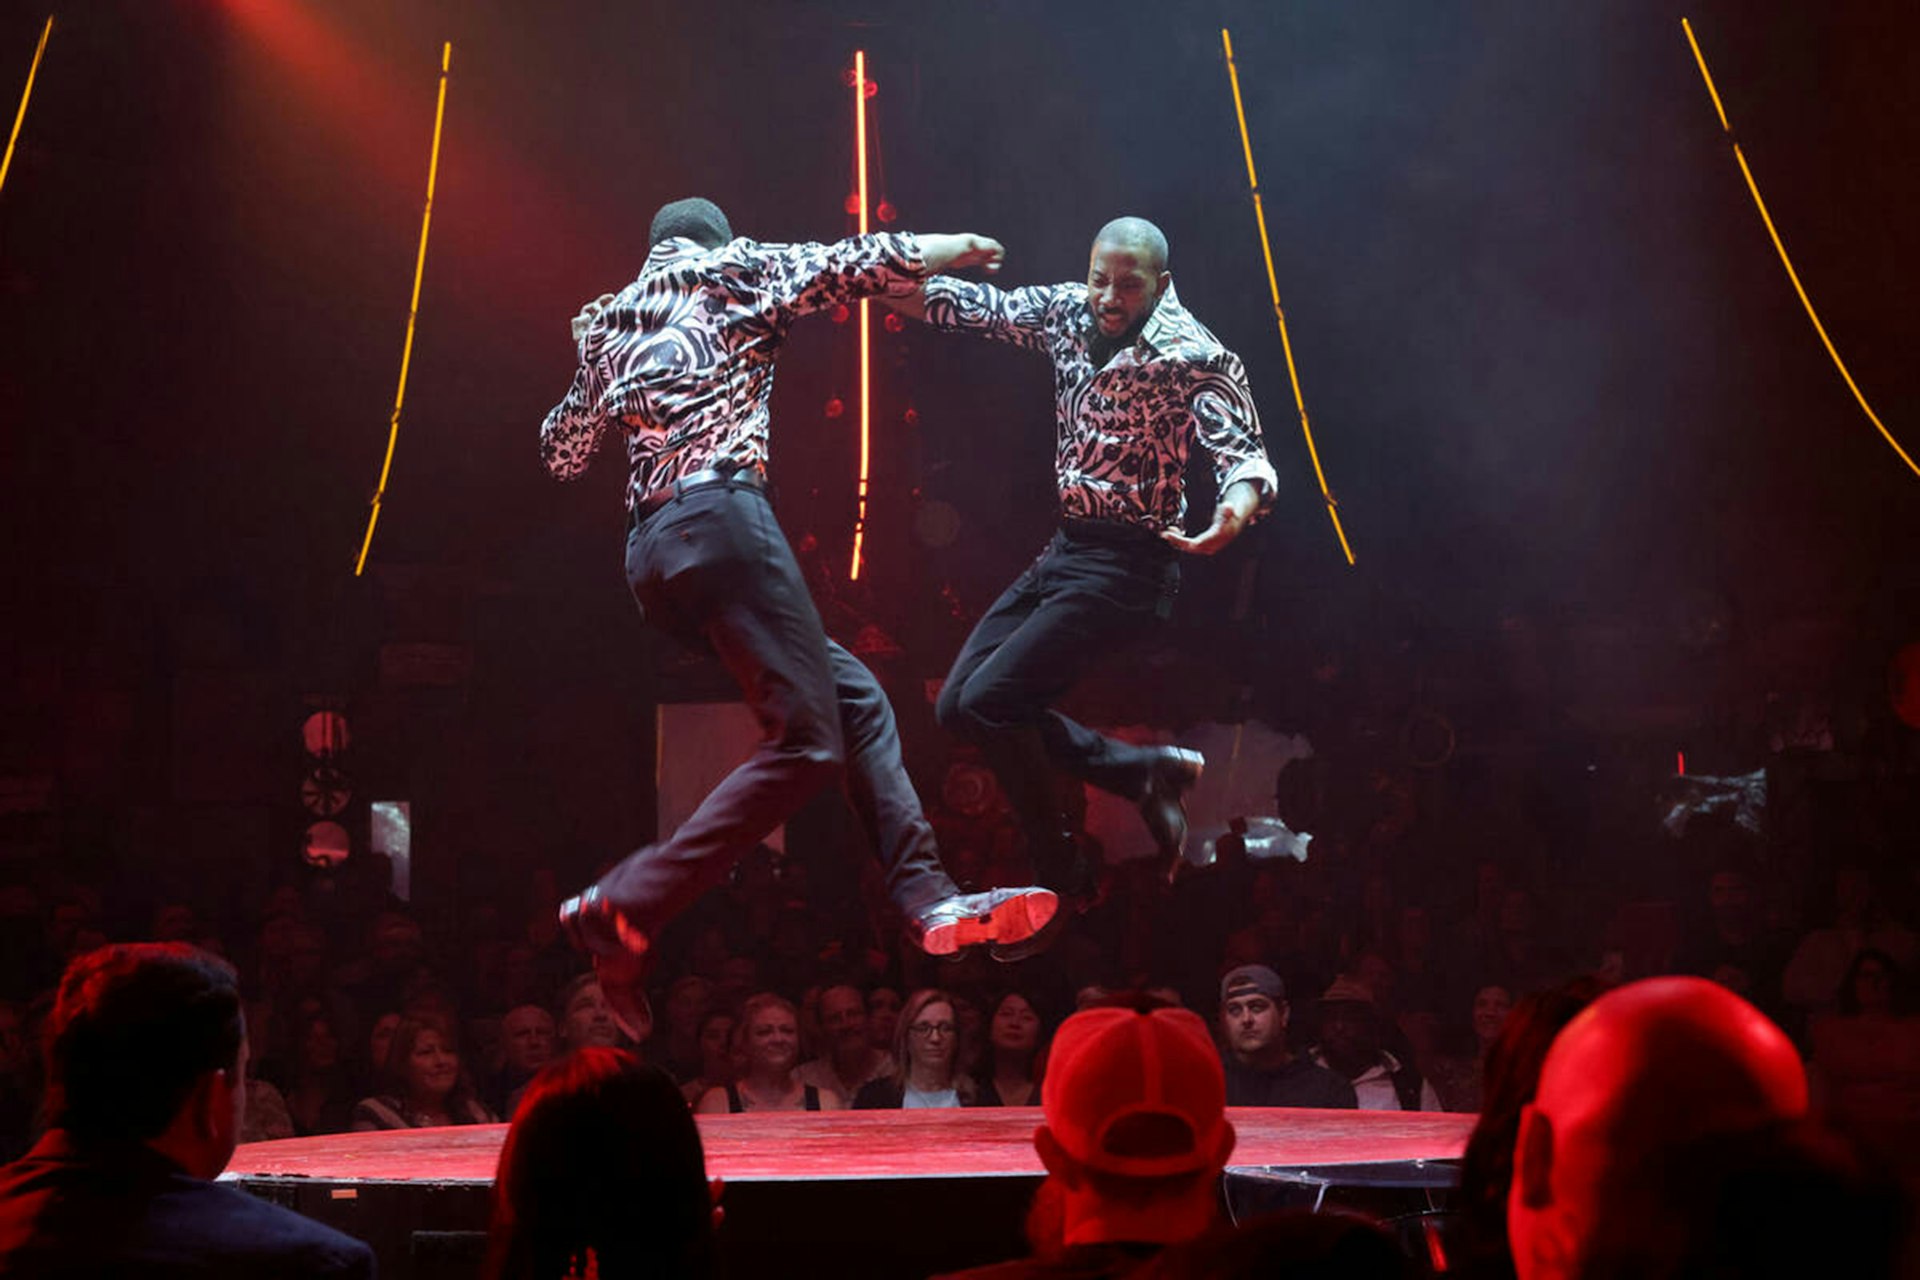 Twin brothers Sean and John Scott tap dance on a small circular stage during "Absinthe" at Caesars Palace in Las Vegas 